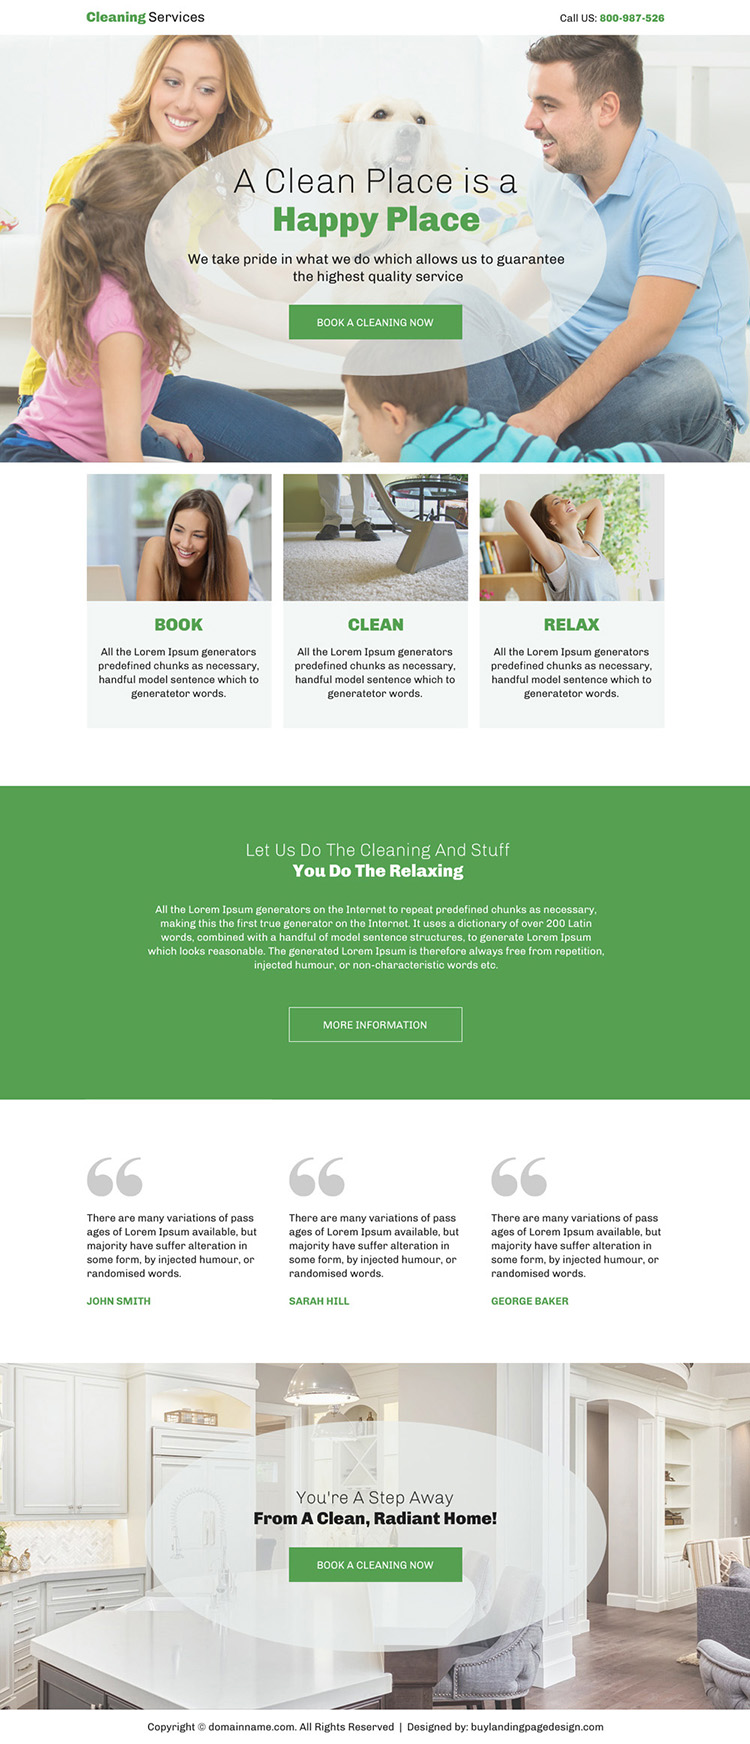 cleaning service appointment booking bootstrap landing page design